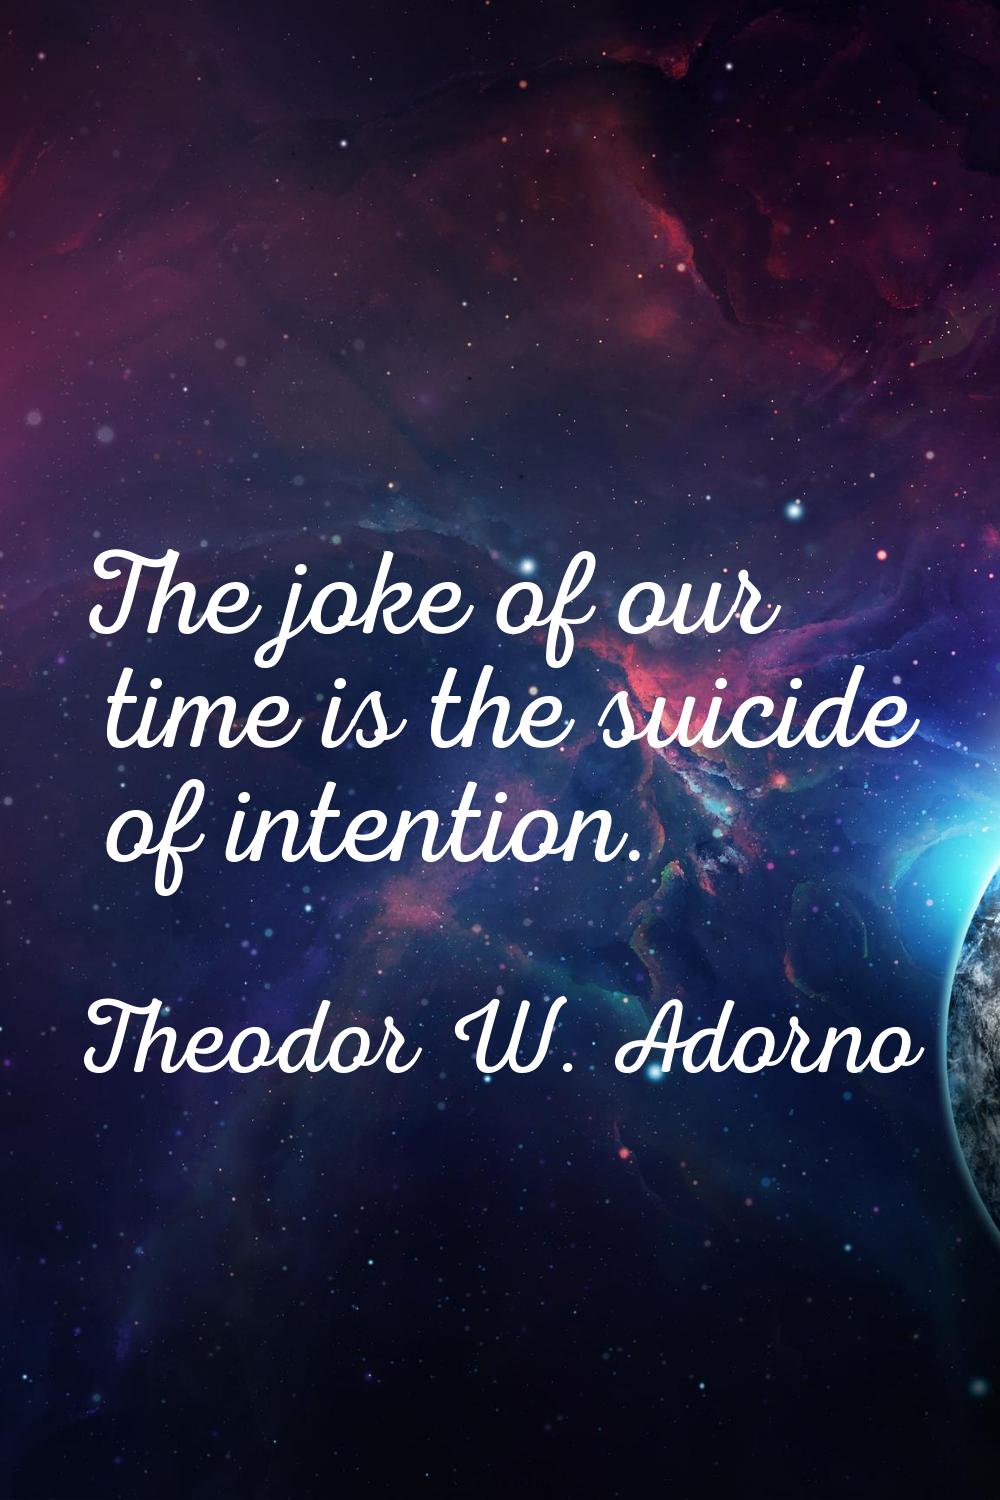 The joke of our time is the suicide of intention.